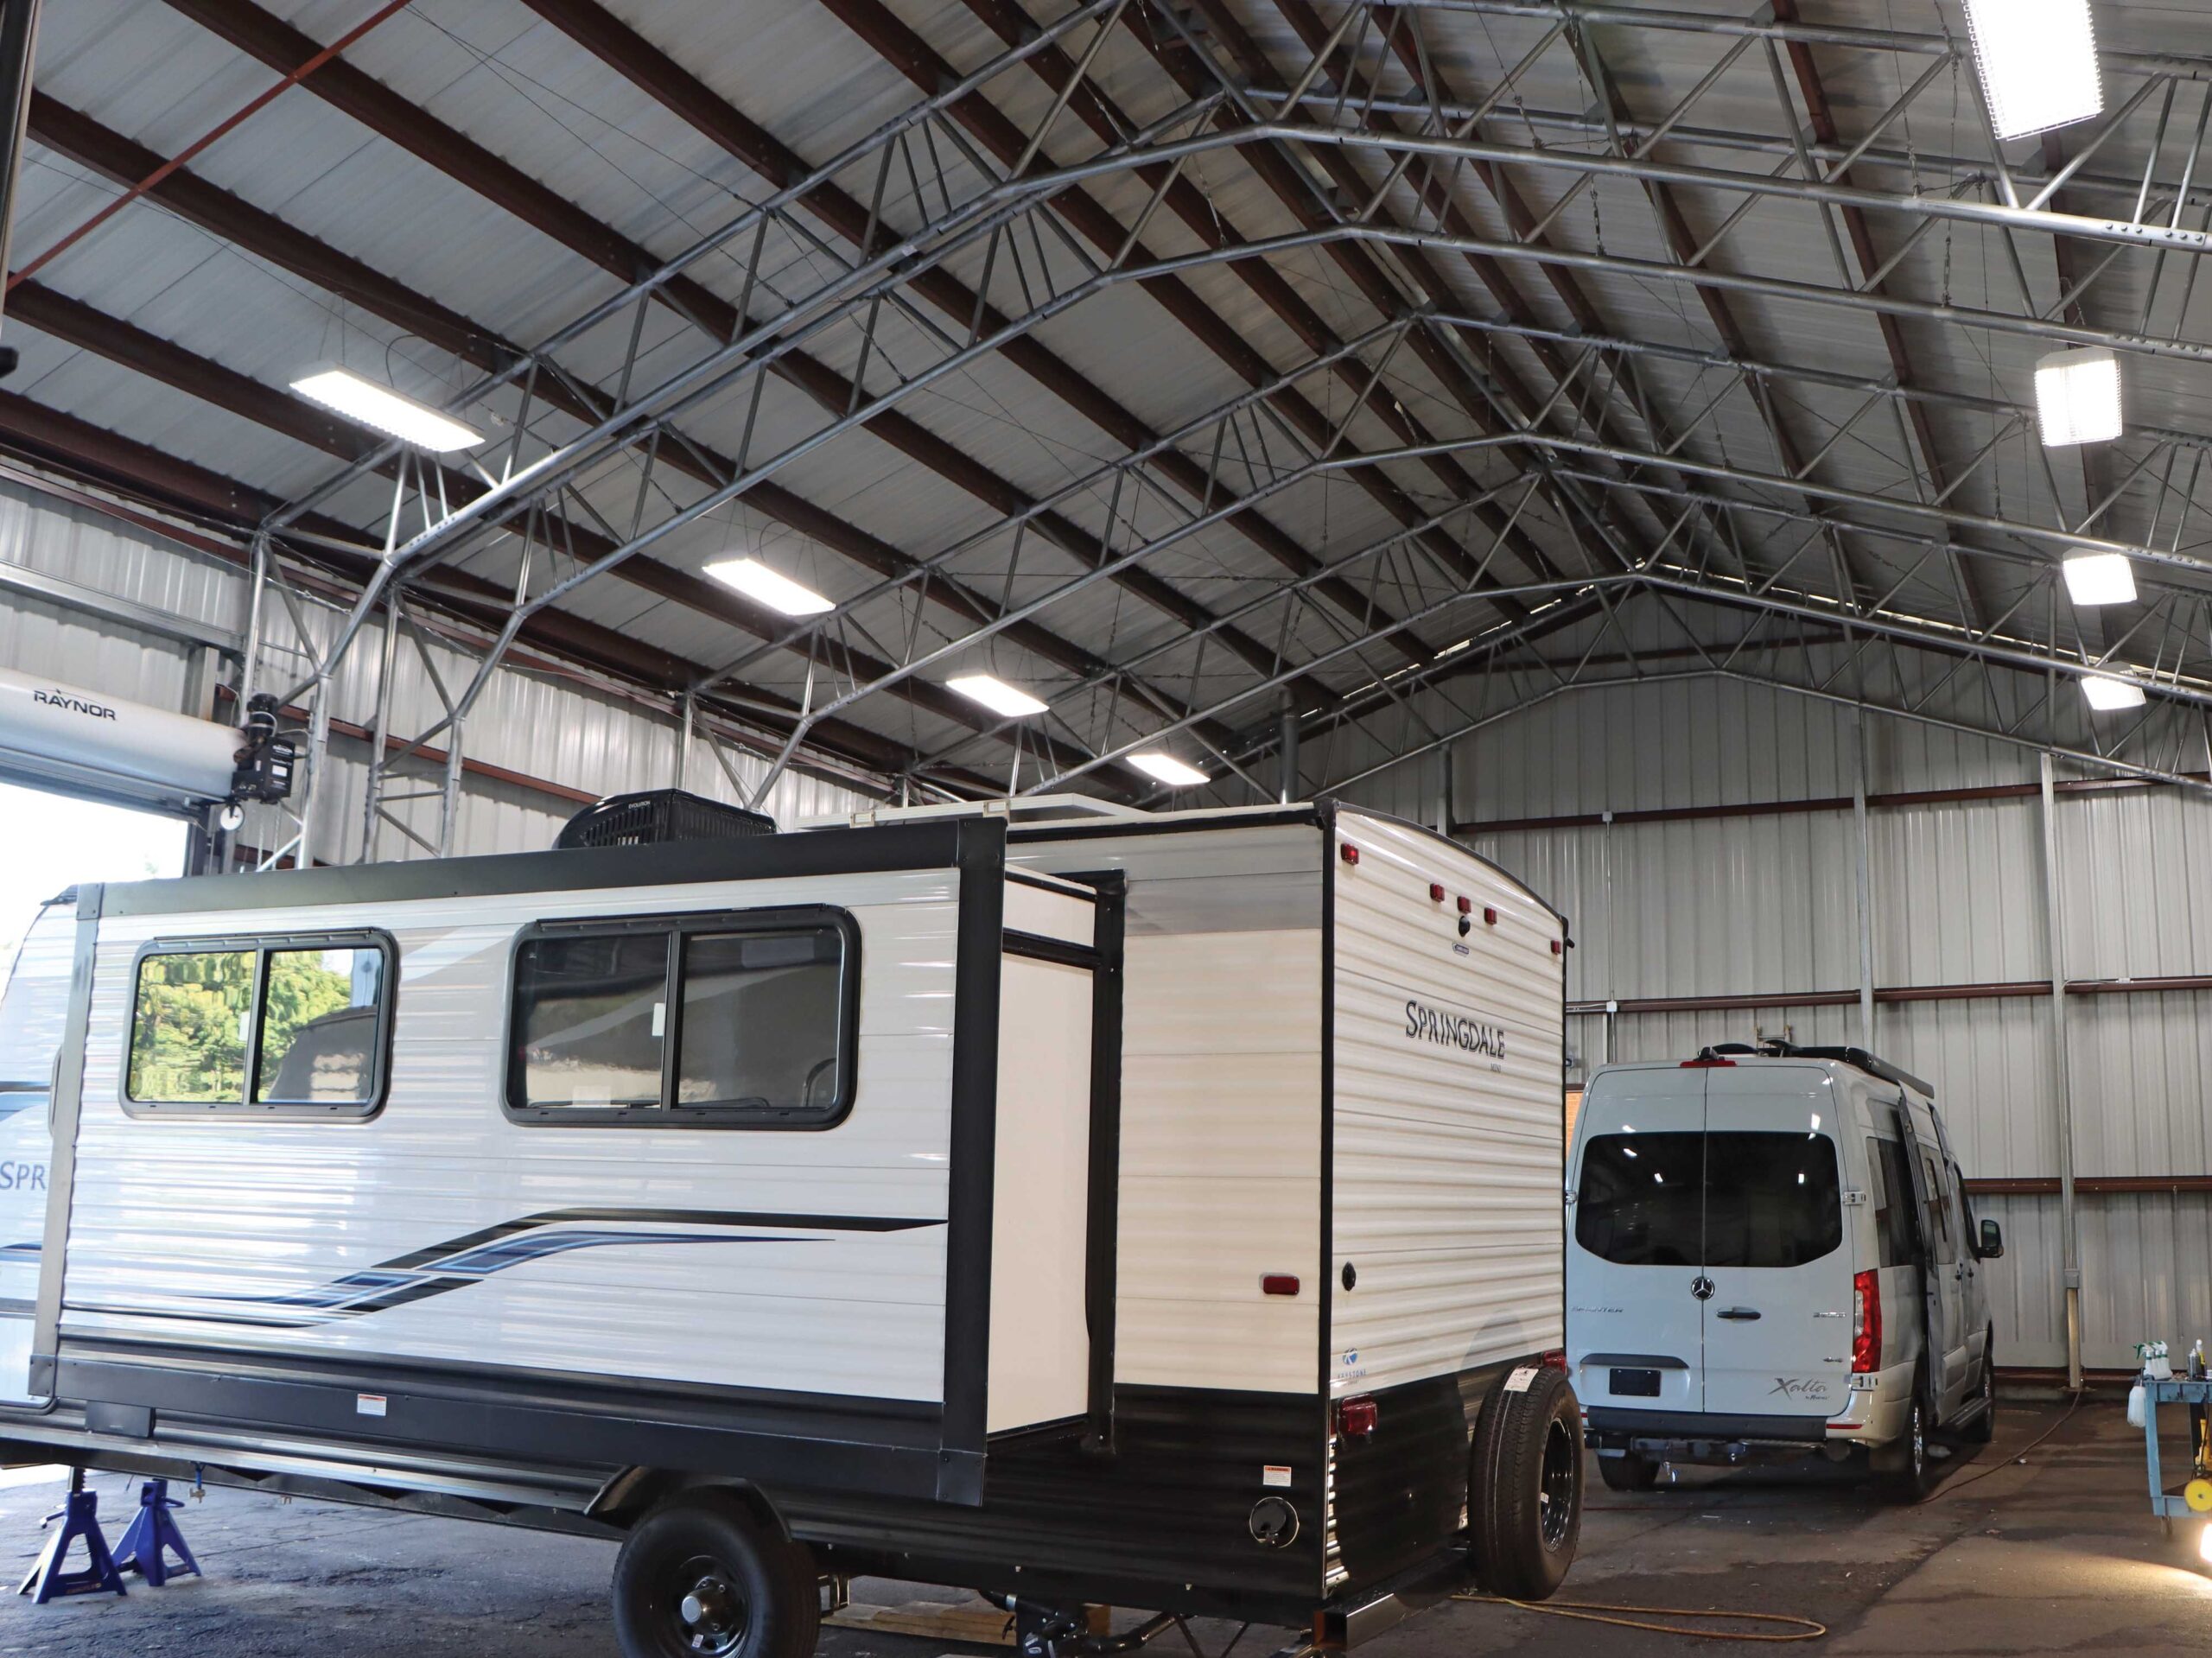 Interior of metal automotive building with a parked rv and van